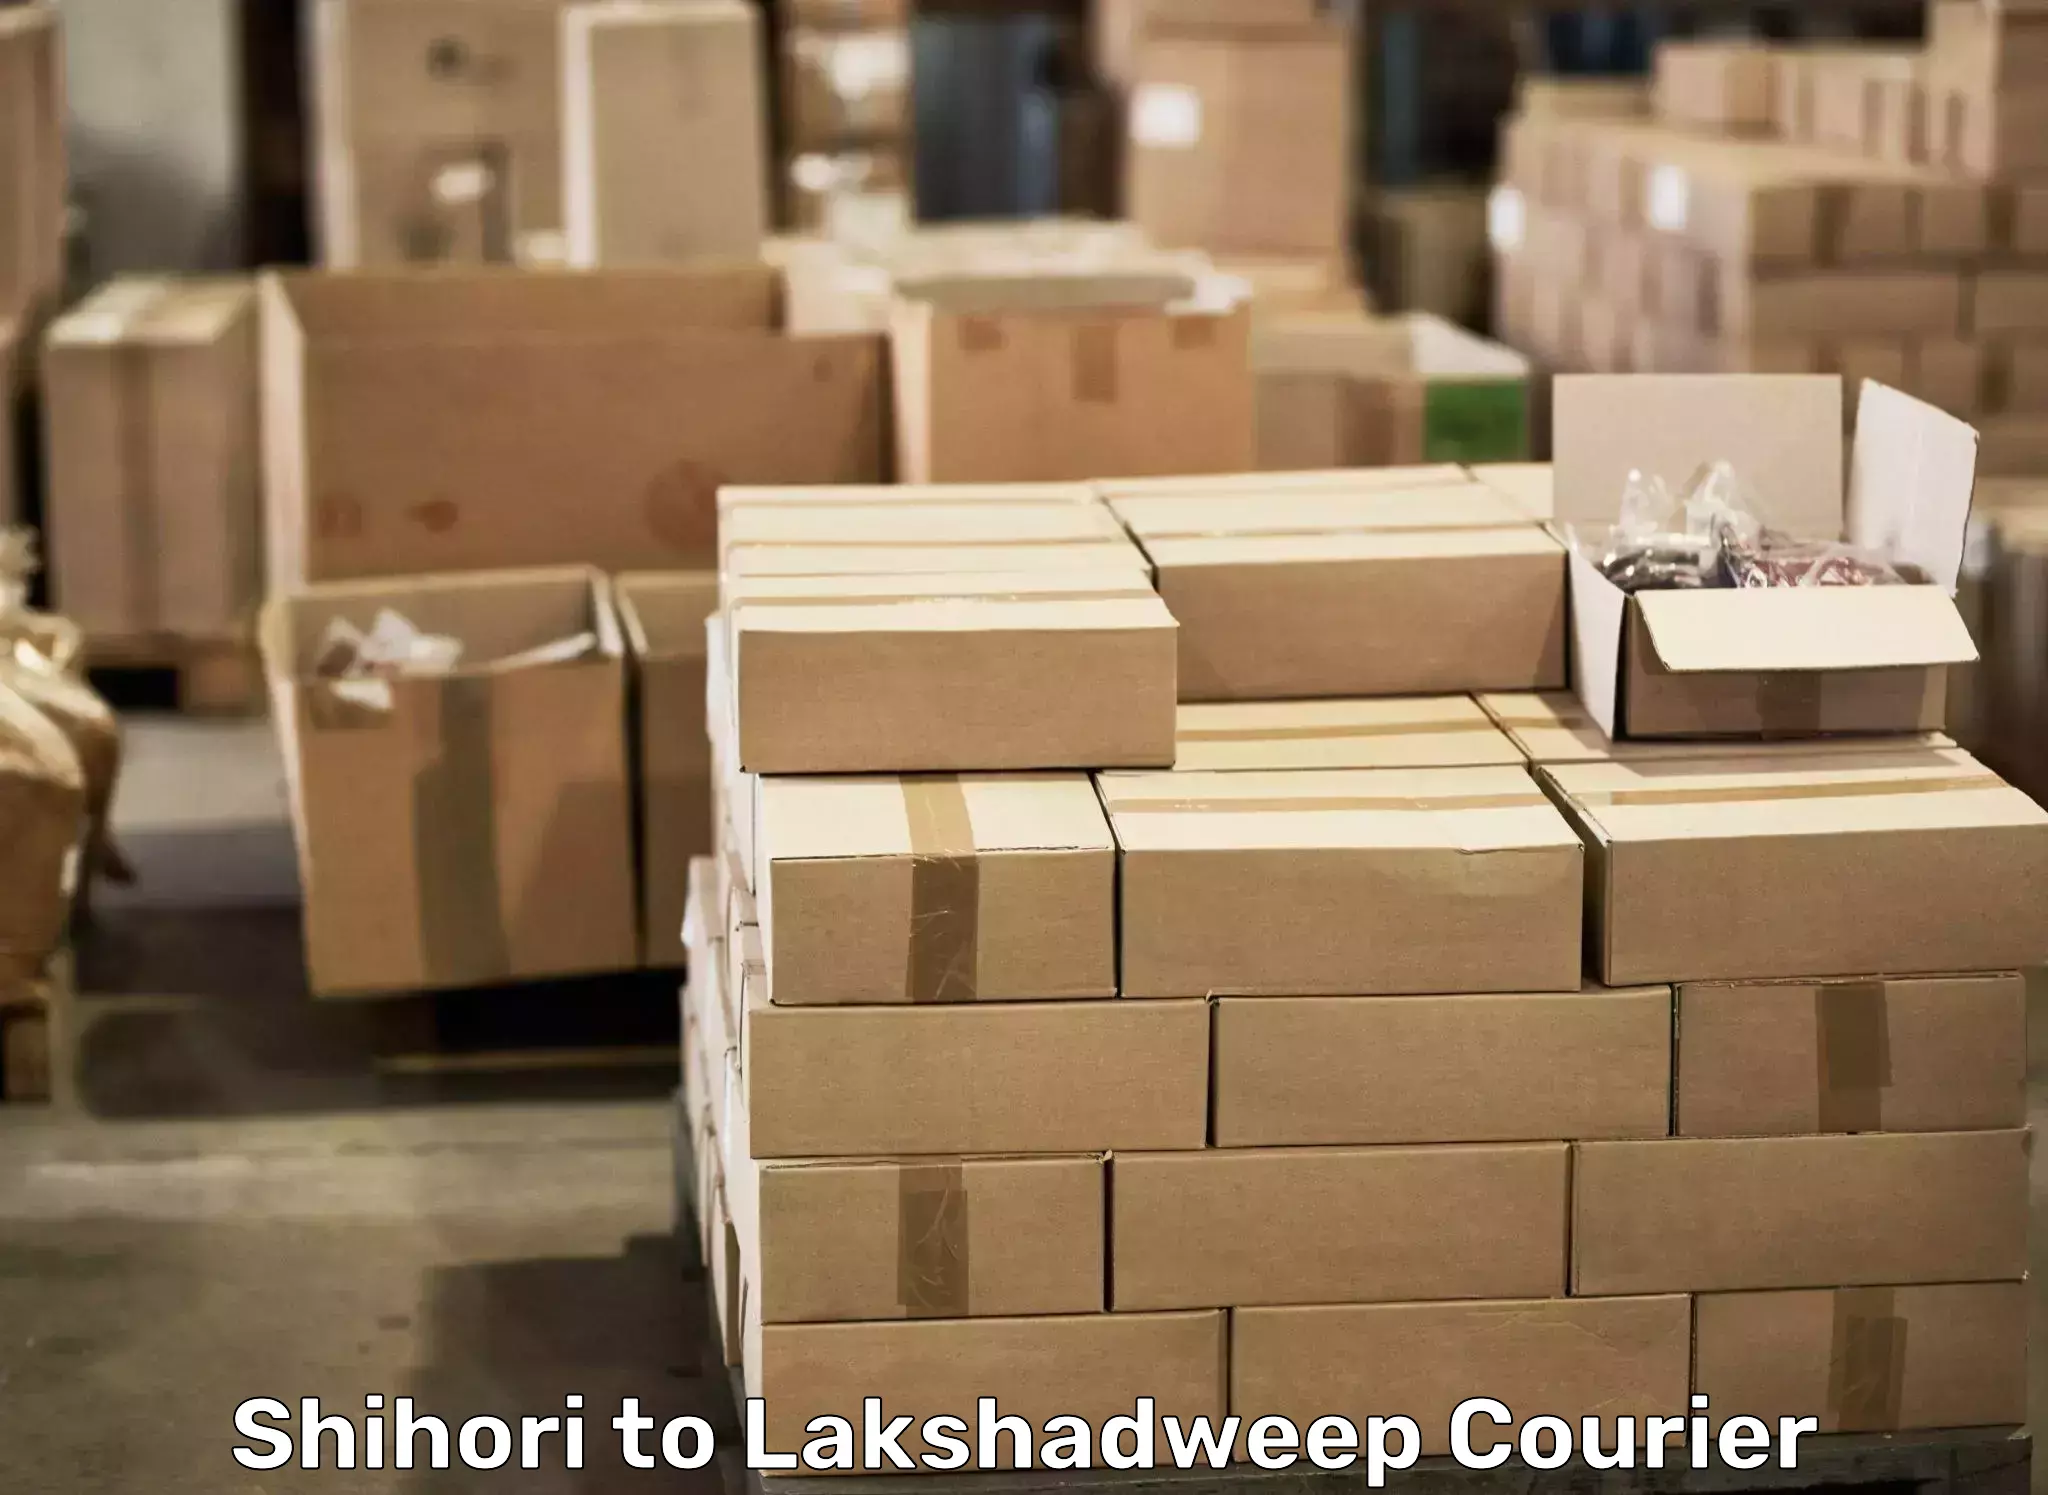 Professional moving assistance in Shihori to Lakshadweep